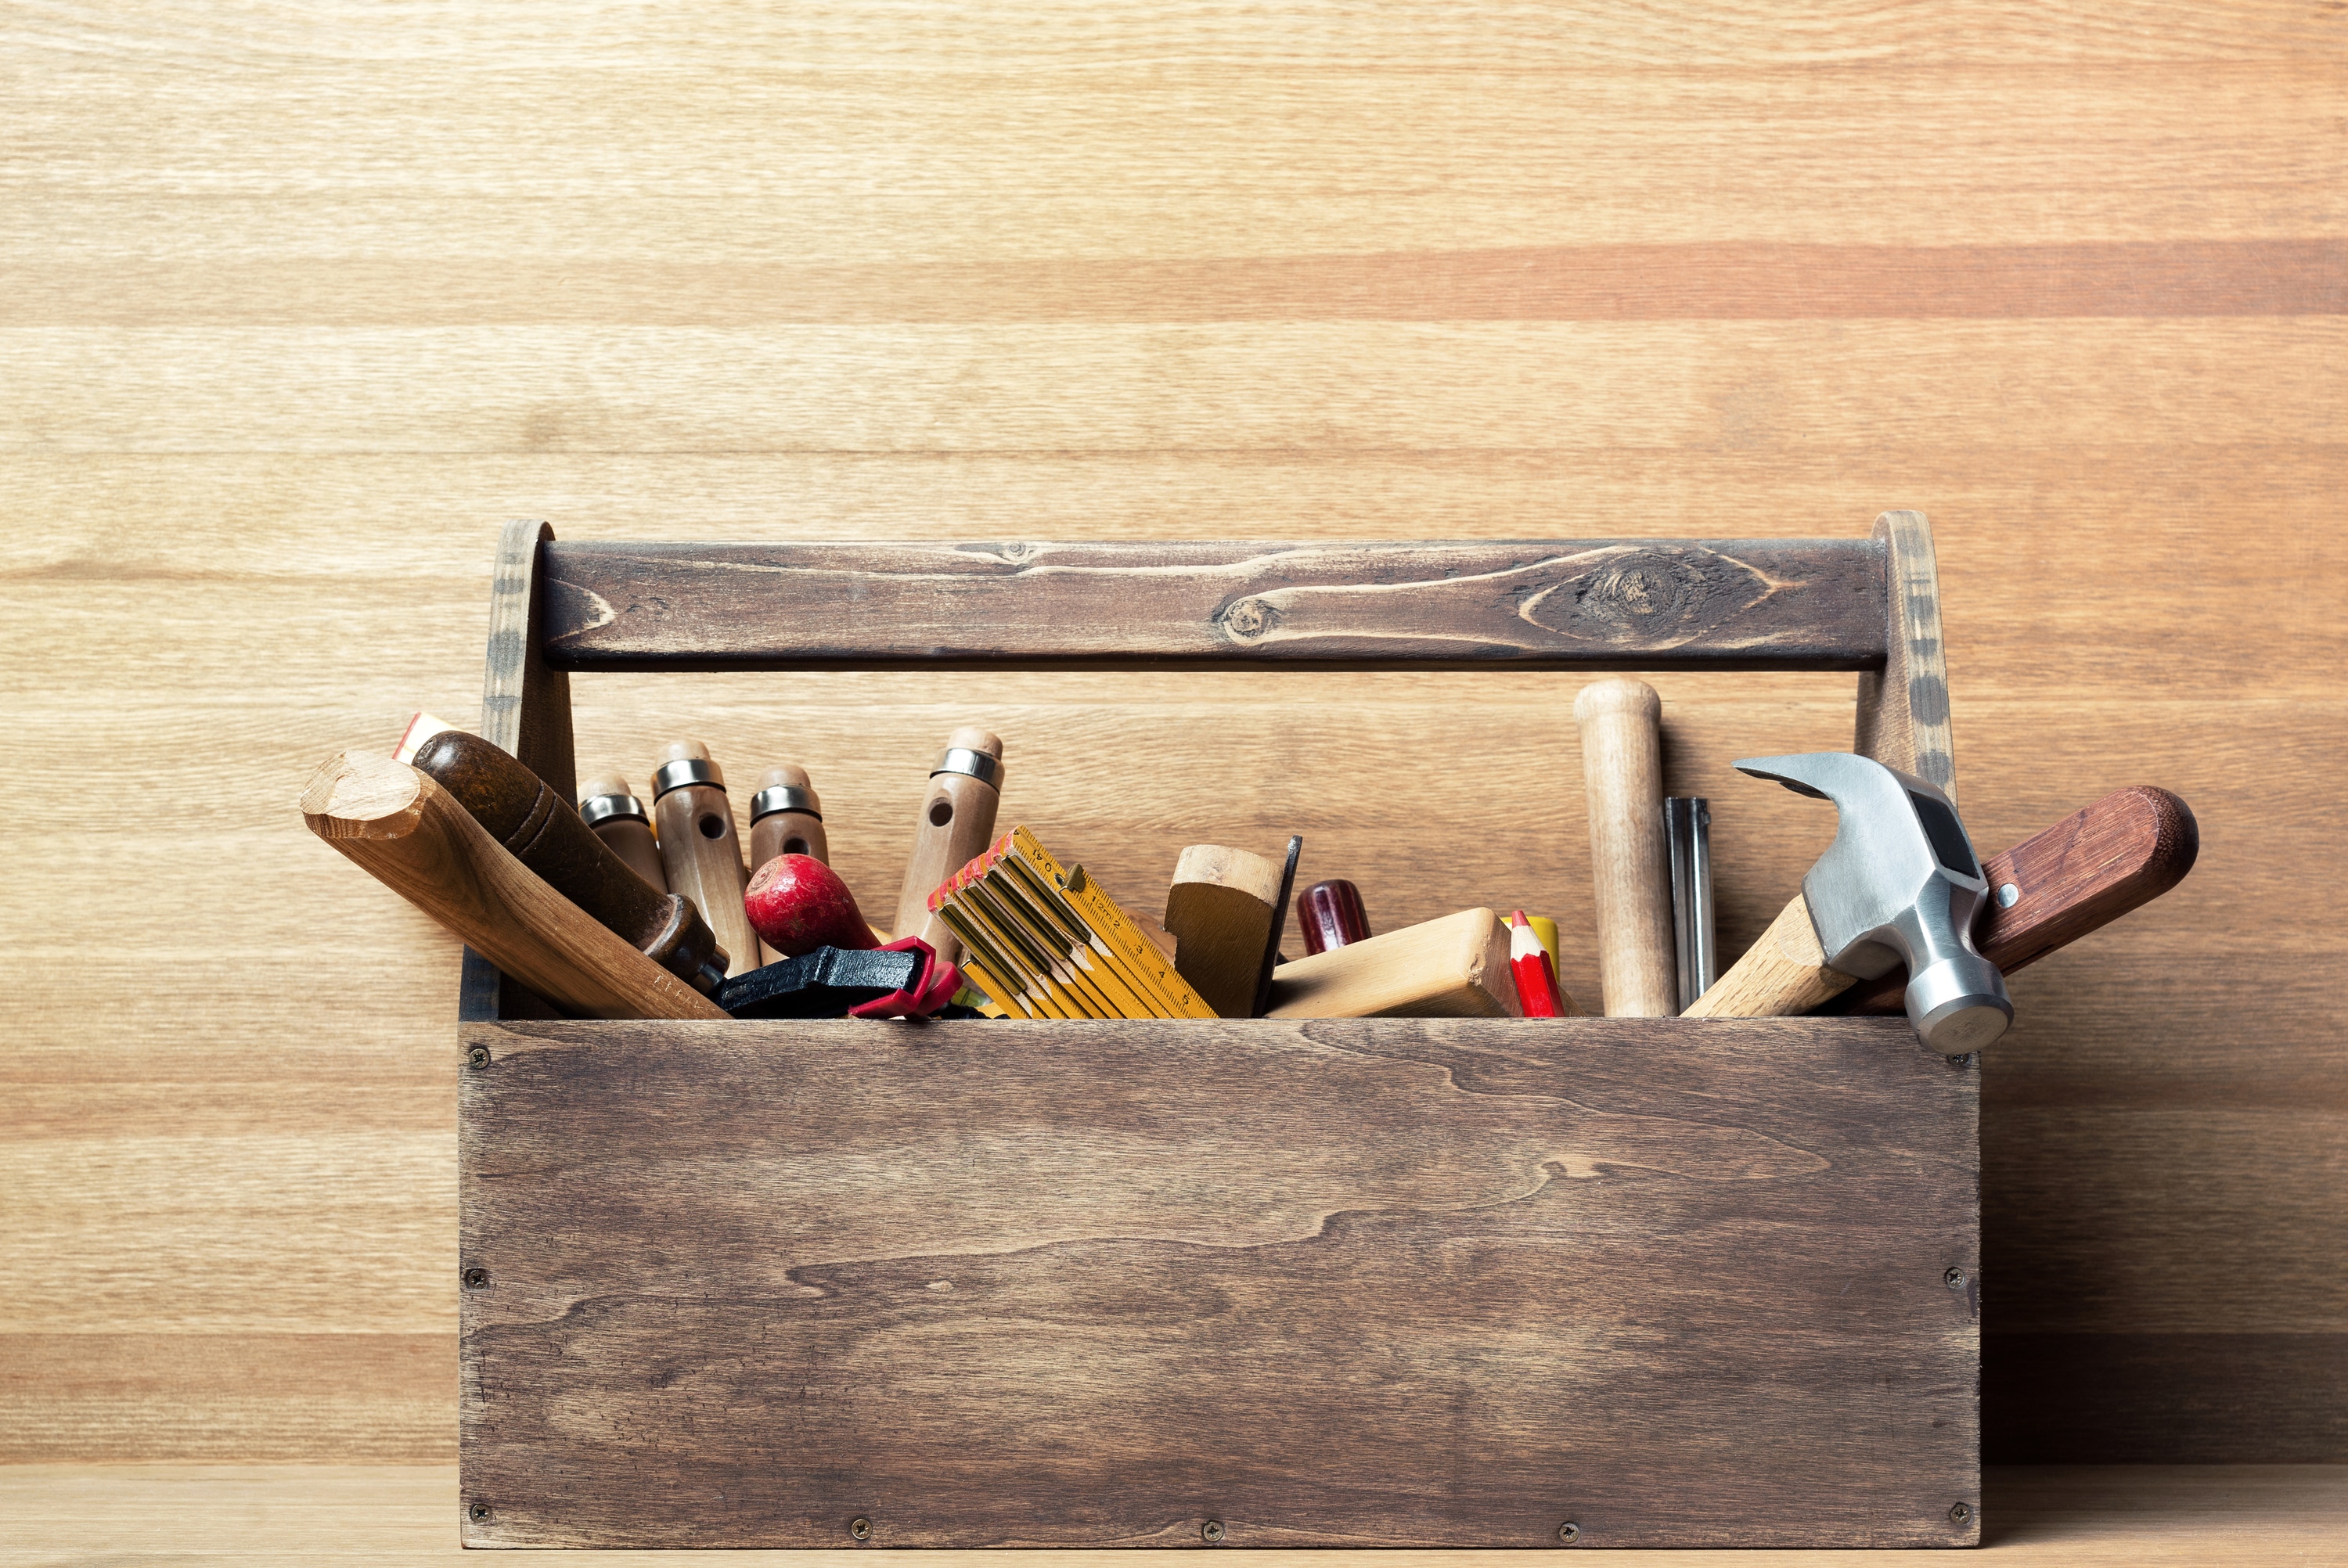 wooden toolbox projects